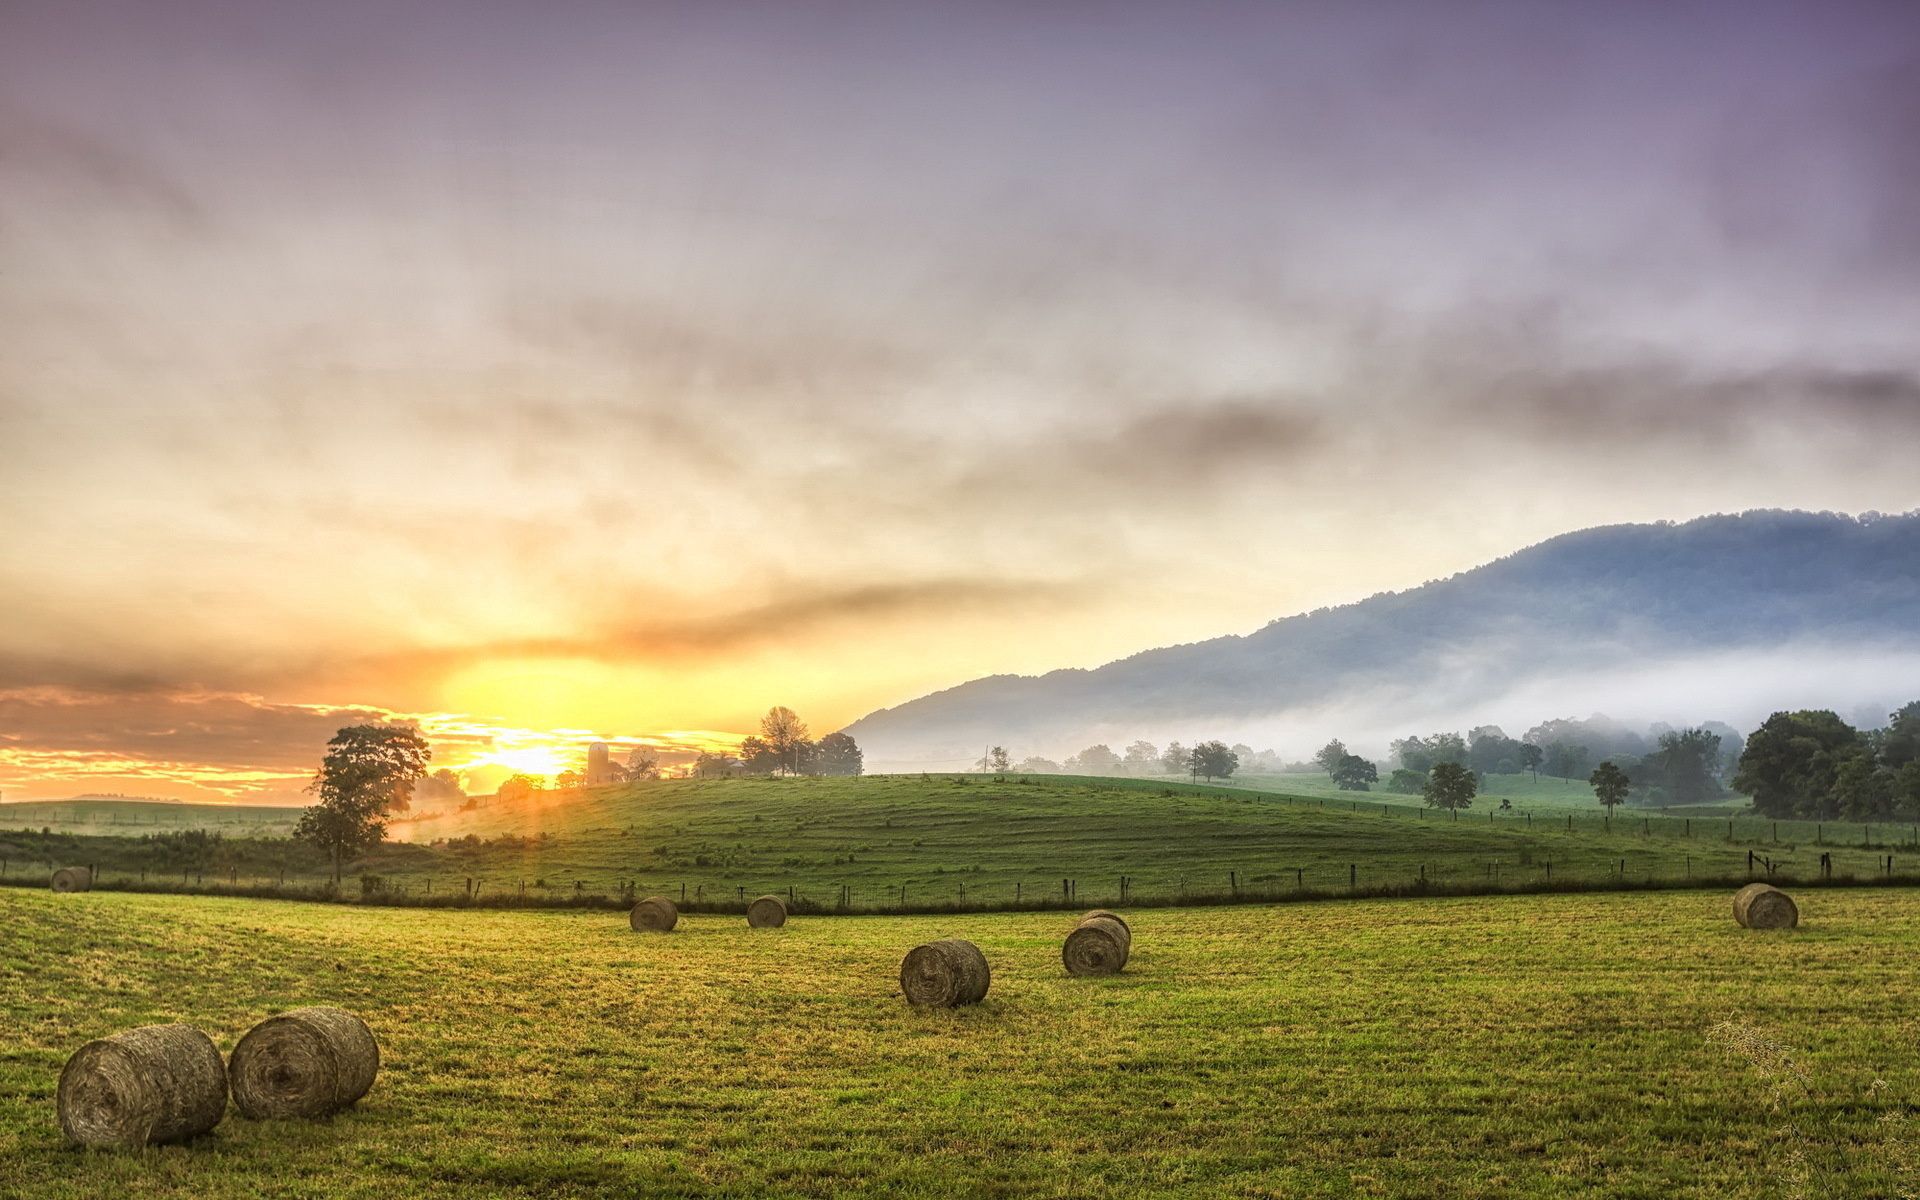 trees, bales, serenity, august, mountains, fog, polyana, hay, sun, glade, nature UHD